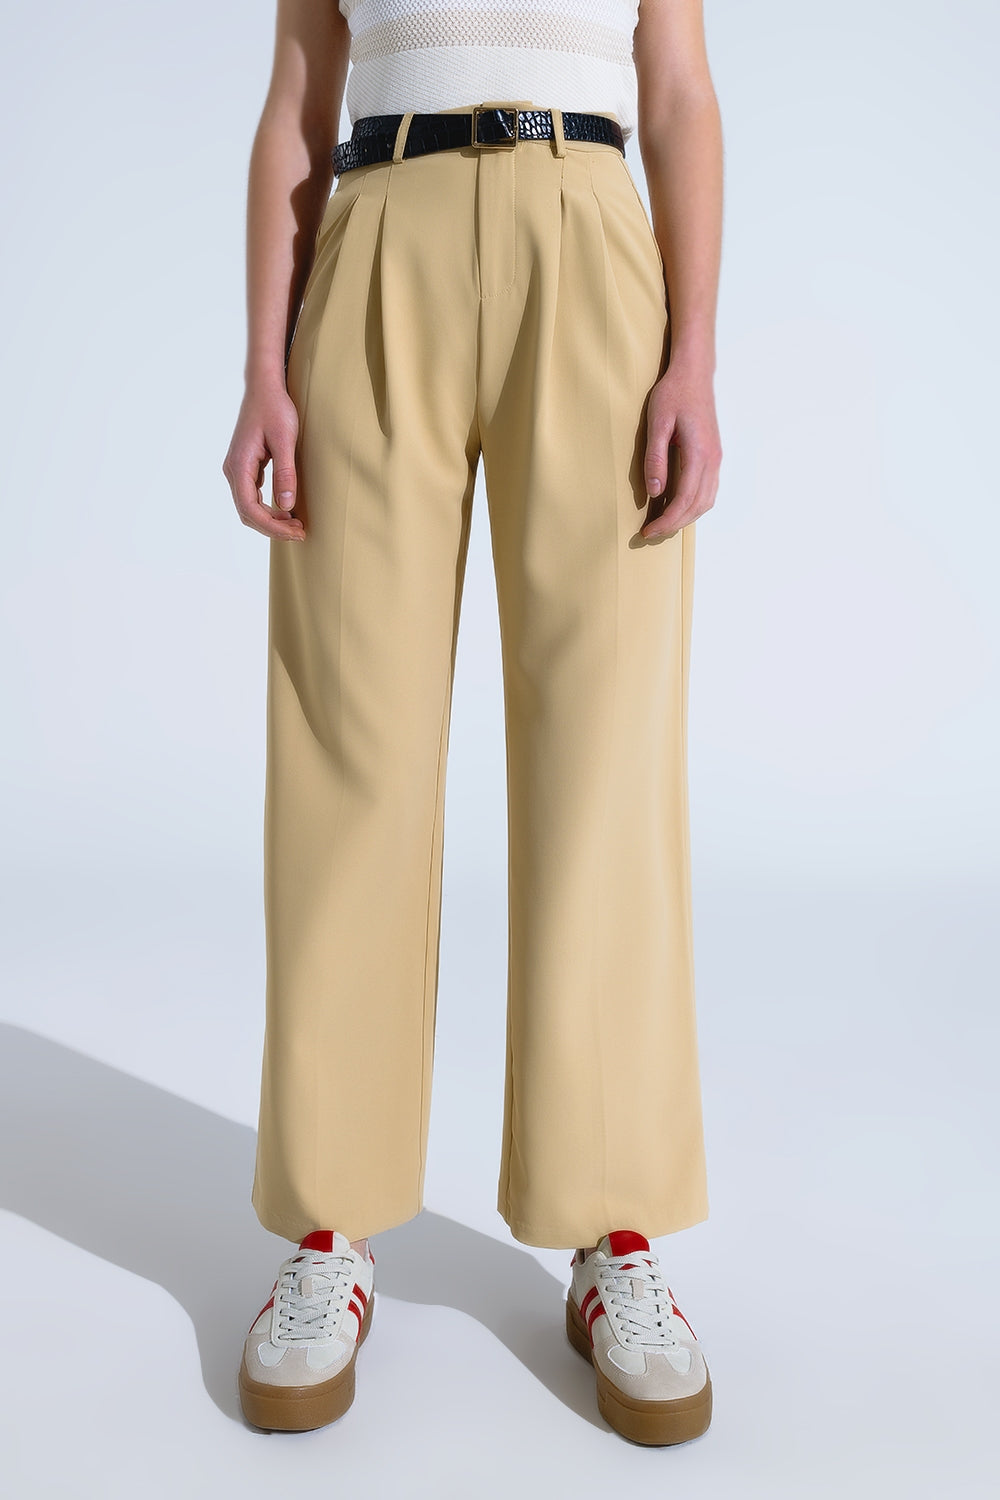 Q2 Straight Leg Trousers With Side Pockets and Darts in Beige